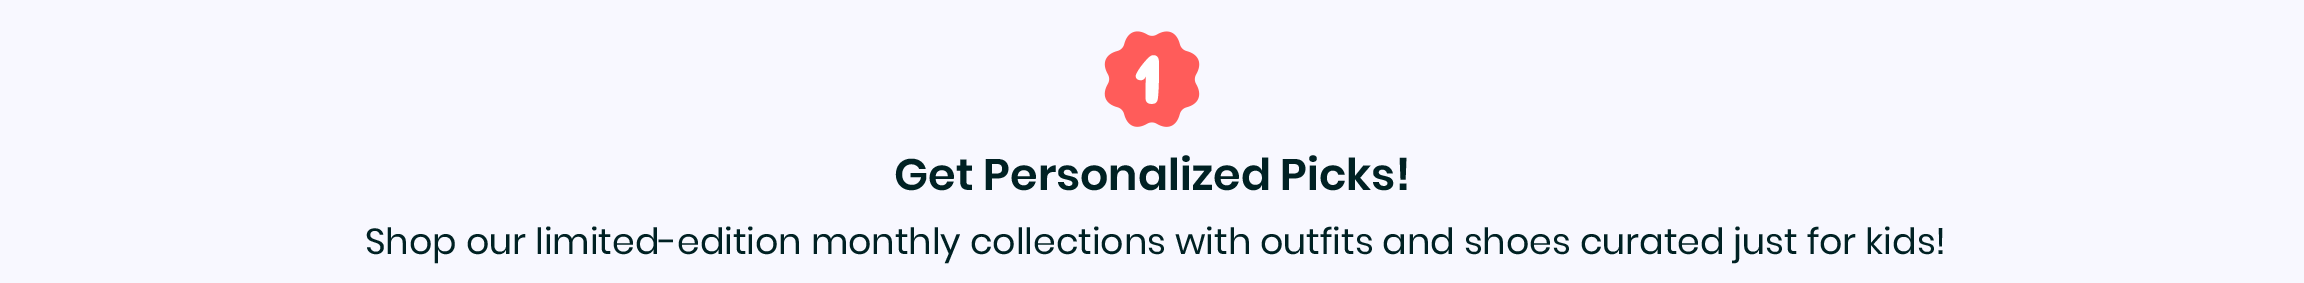 1. Get personalized picks! - Shop our limited-edition monthly collections with outfits and shoes curated just for kids!